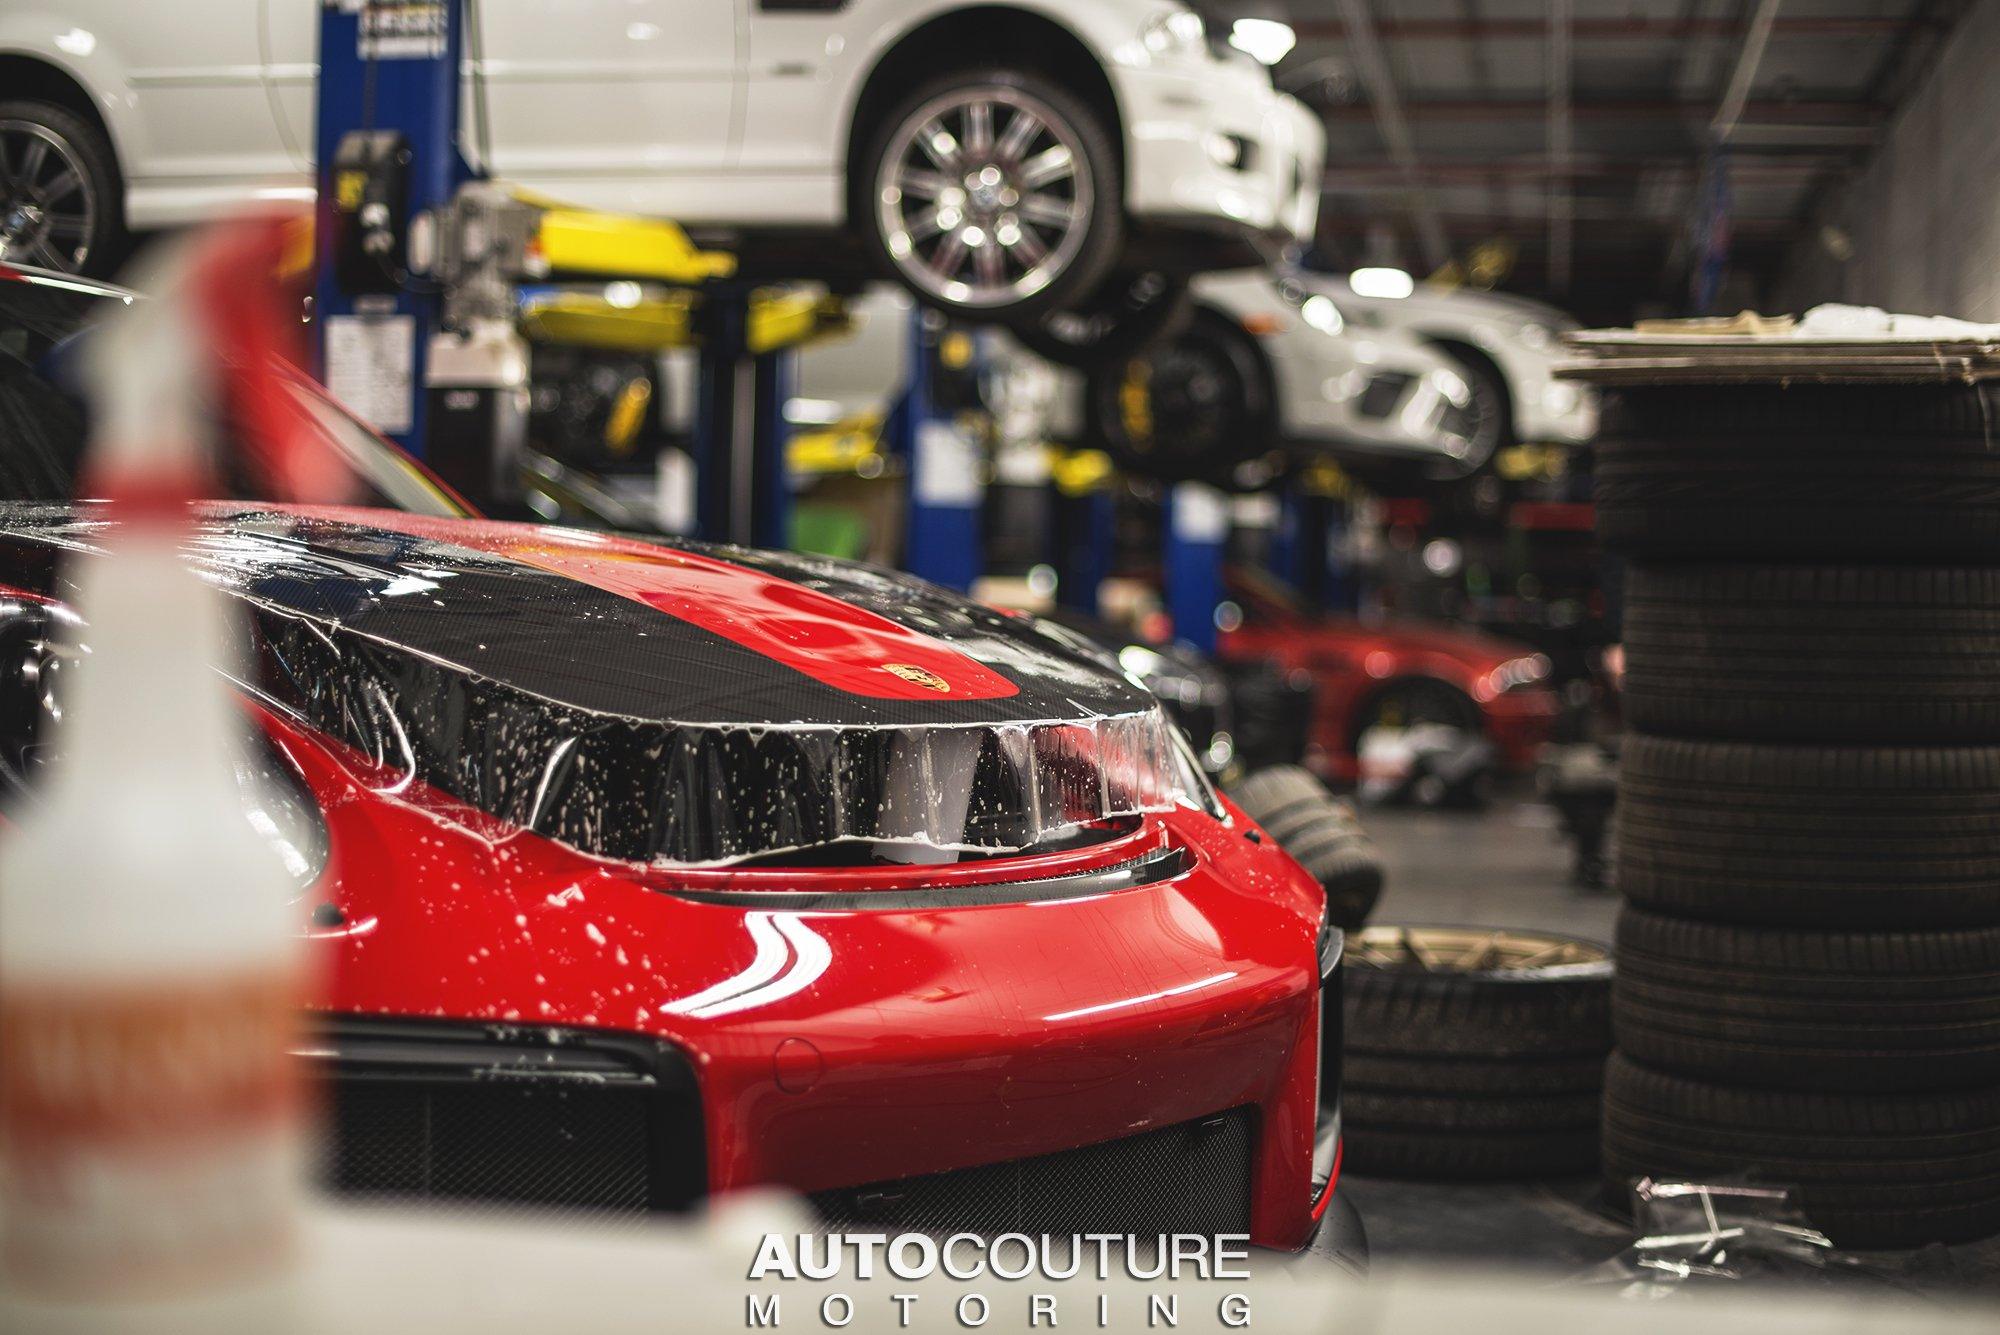 All About Paint Protection Film (PPF) – AUTOcouture Motoring